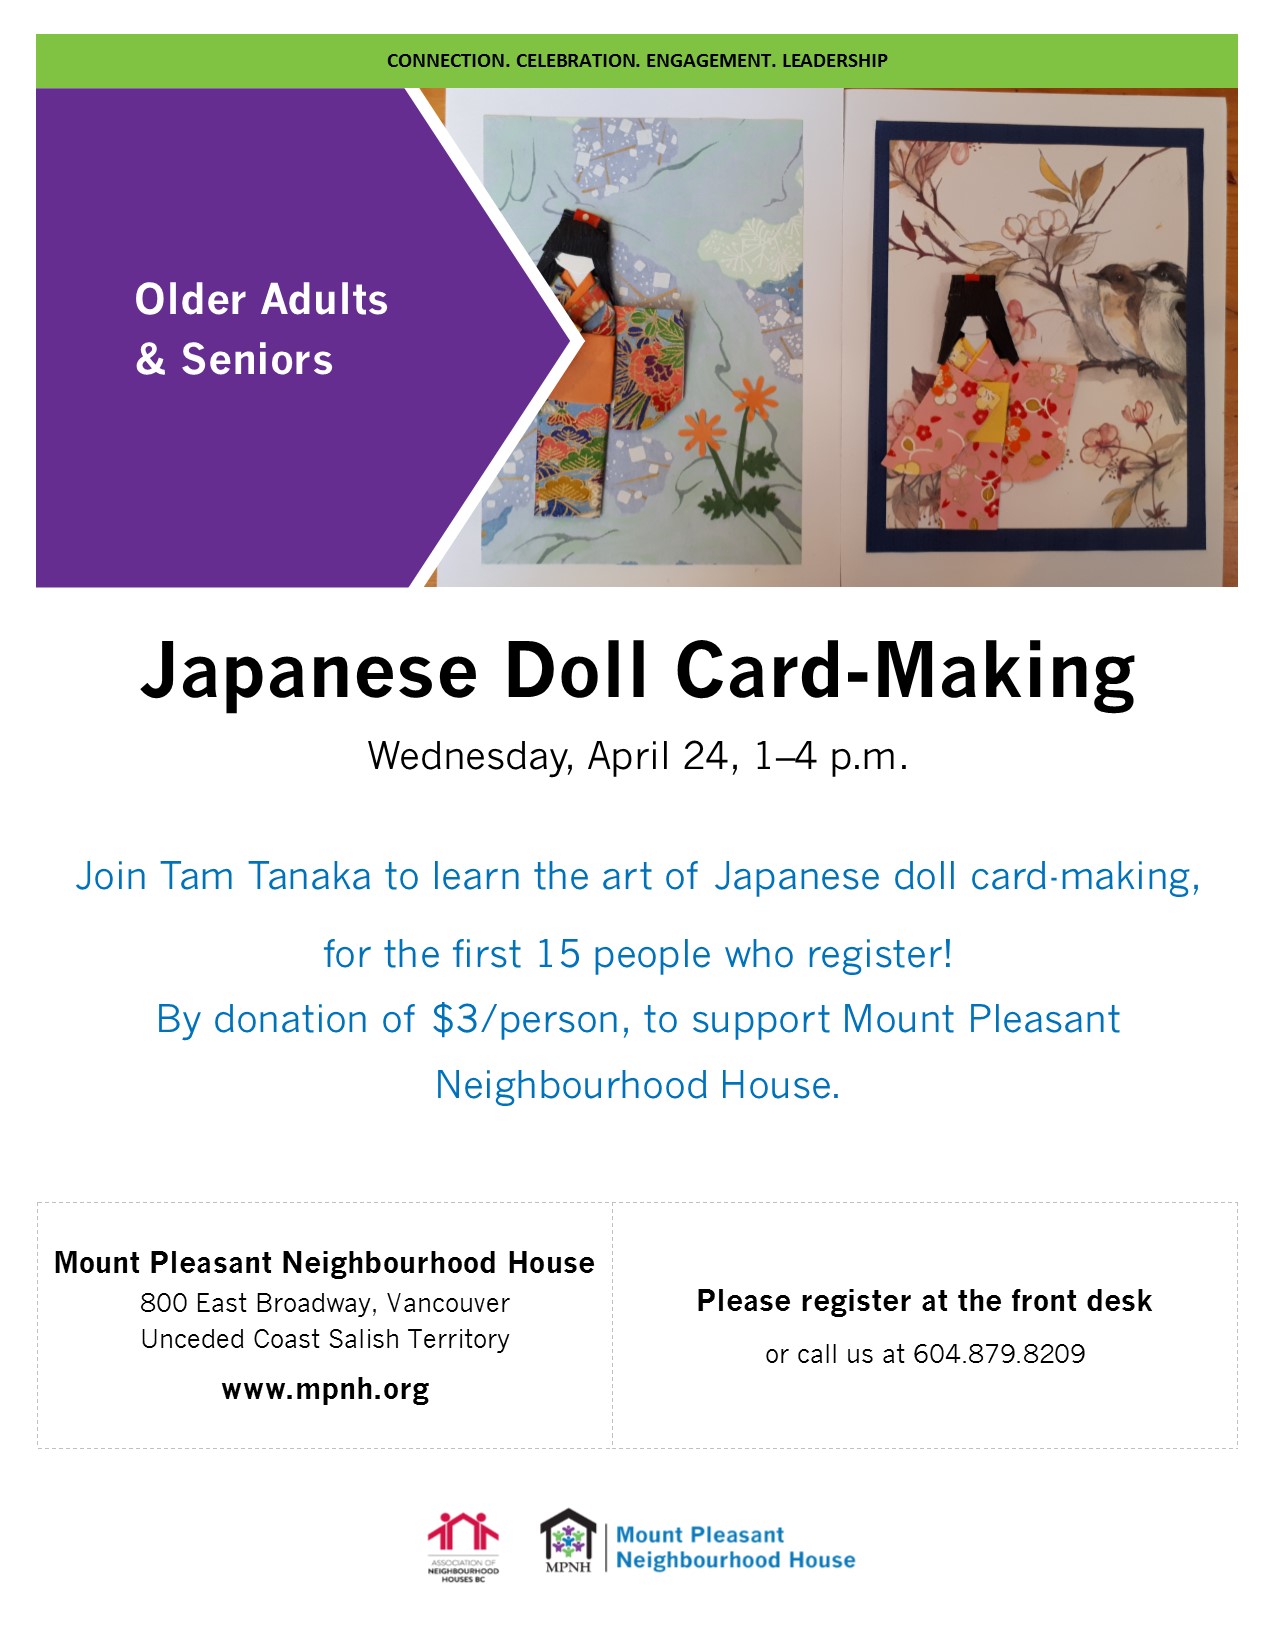 A poster with images of Japanese doll cards